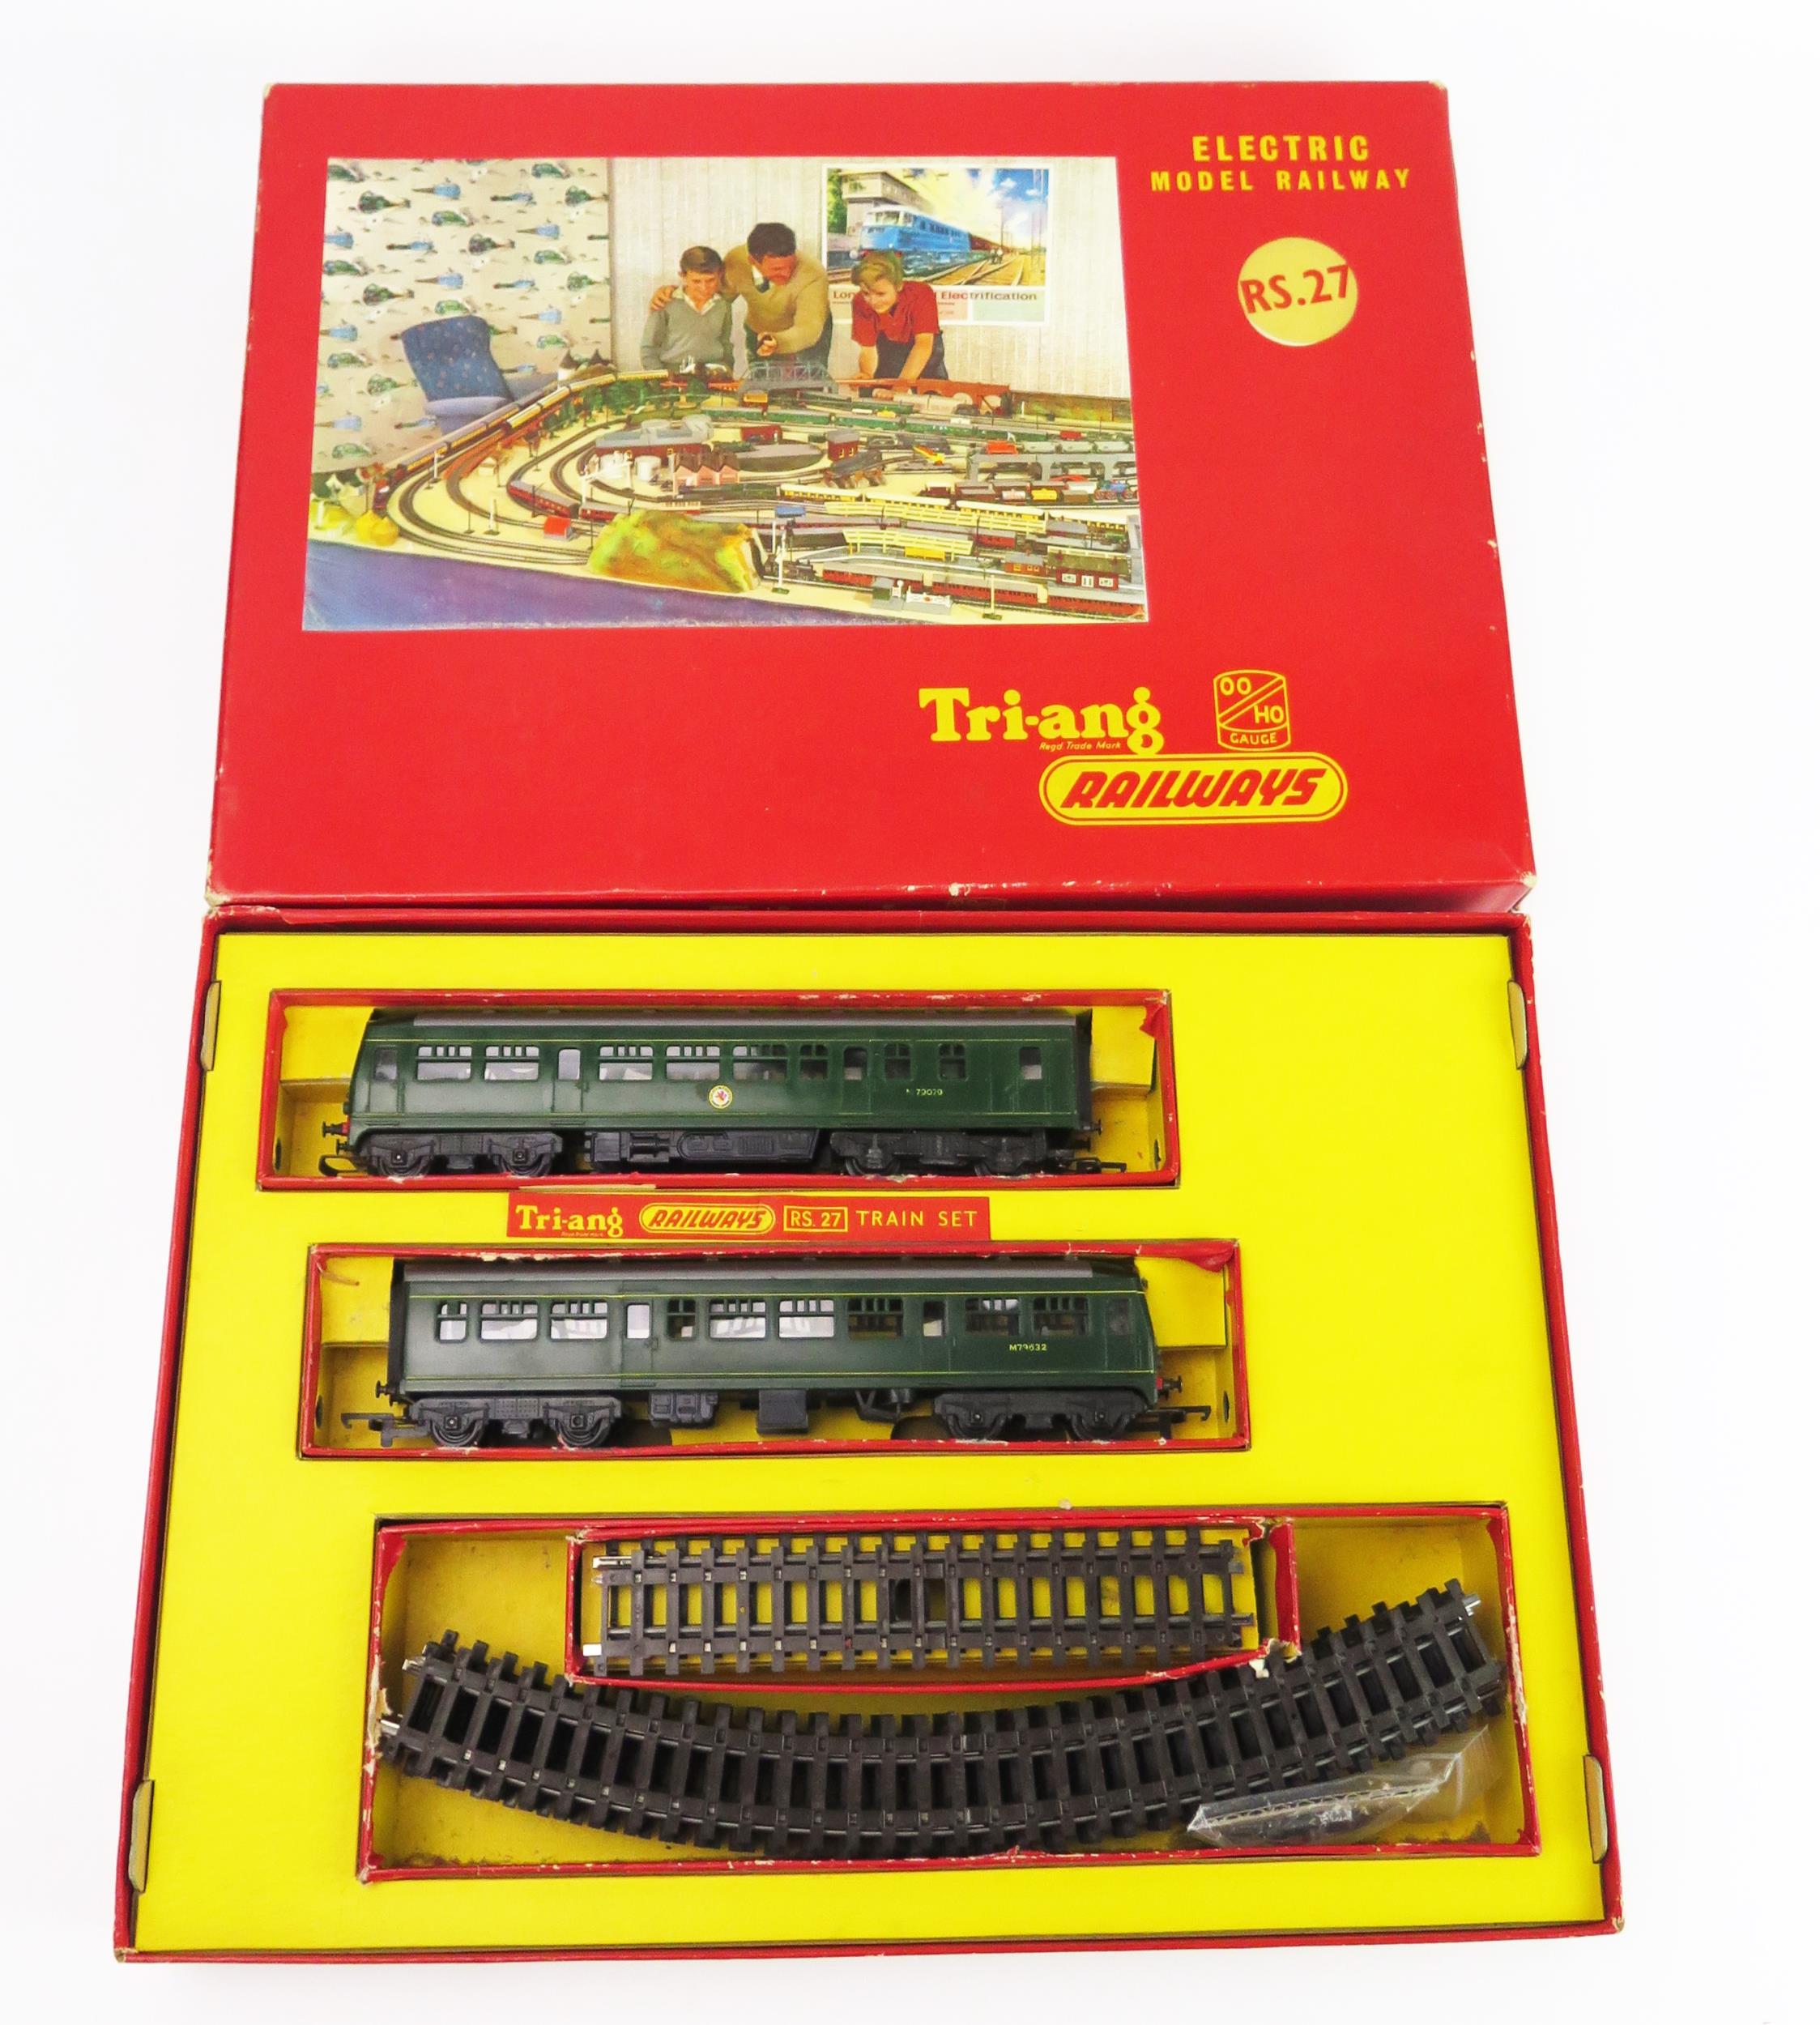 Triang Railways OO Gauge RS27 Suburban DMU 2 Car Train Set - excellent in good box with one torn